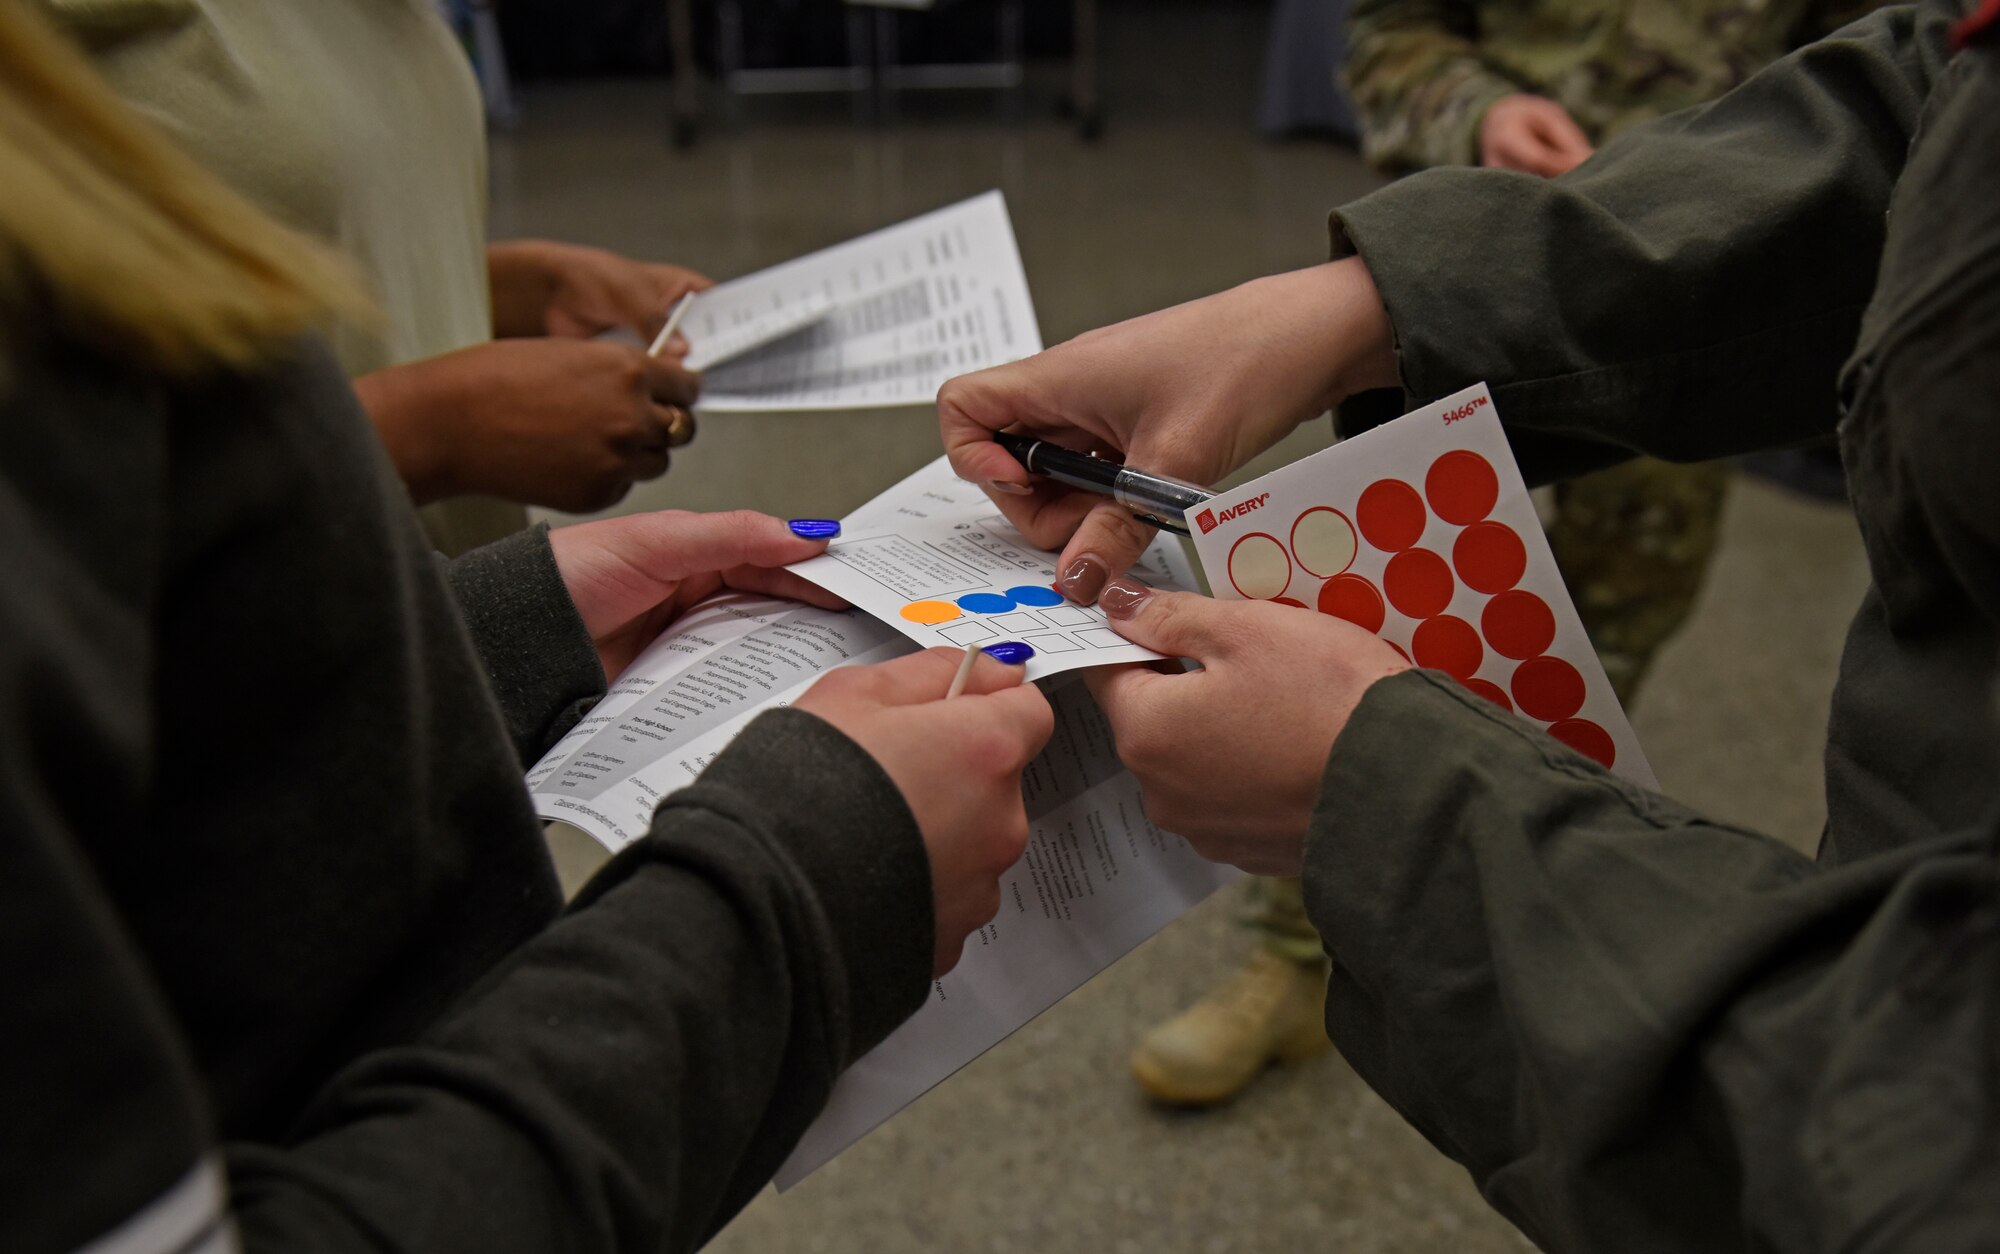 U.S. Air Force Senior Airman Megan Hatch, 93rd Air Refueling Squadron boom operator, places a sticker on a student’s job fair booth tracker during the annual NEWTech Skills Center job fair in Spokane, Washington, April 24, 2019. The event hosted several science, technology, engineering, art and math careers with industry professional to showcase the ins-and-outs of their job. (U.S. Air Force photo by Senior Airman Jesenia Landaverde)